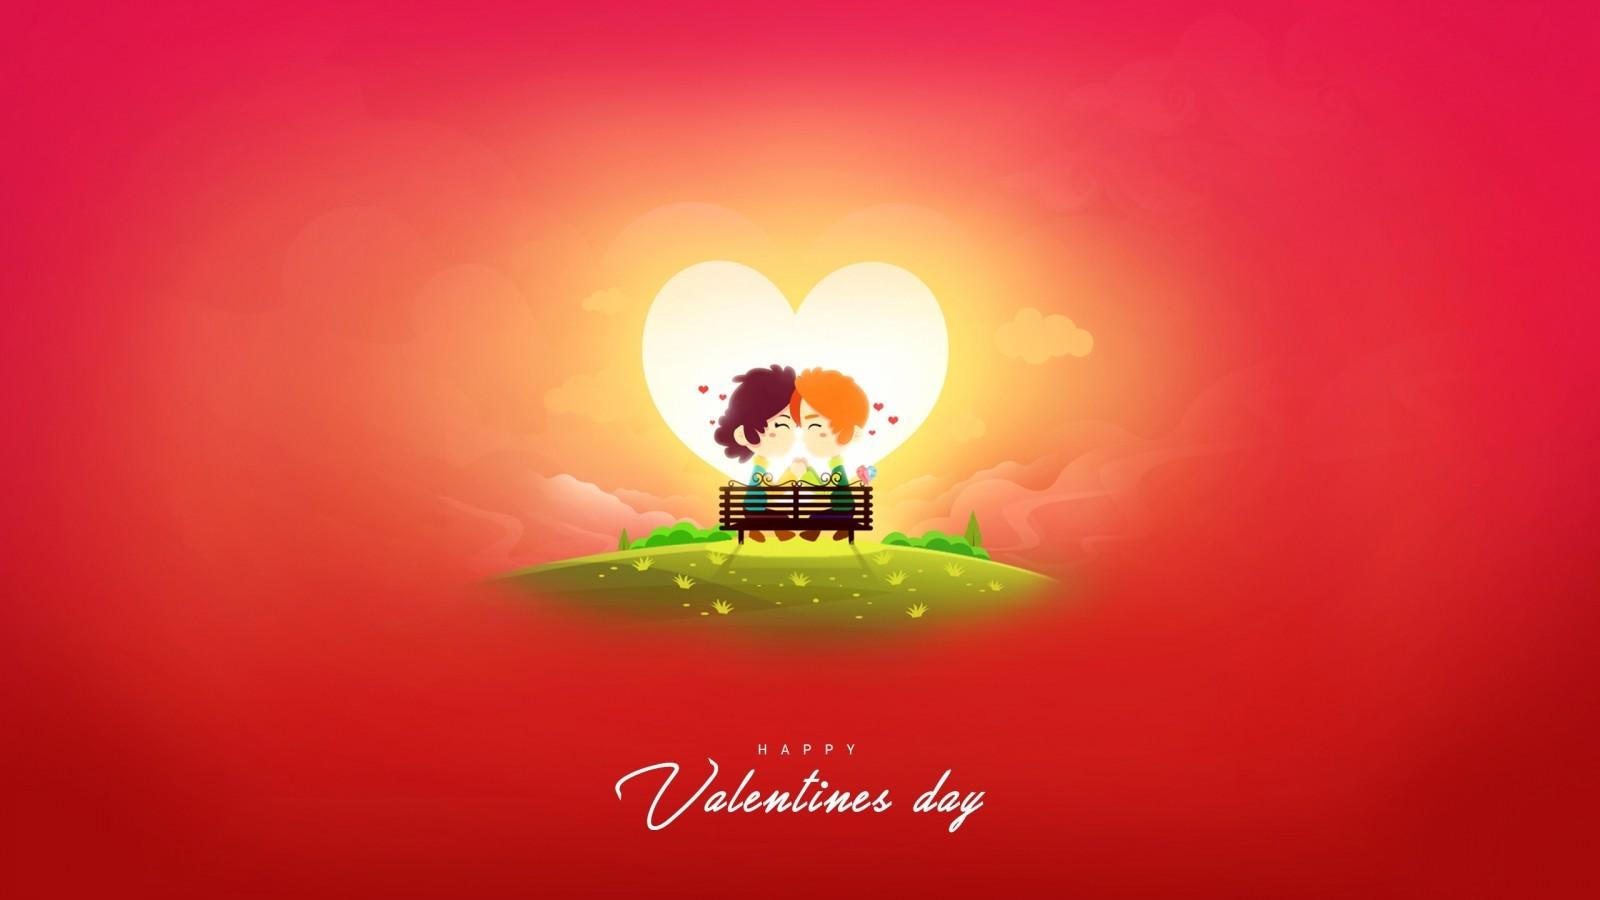 Download 1600x900 Valentine's Day, Couple, Heart, Cute